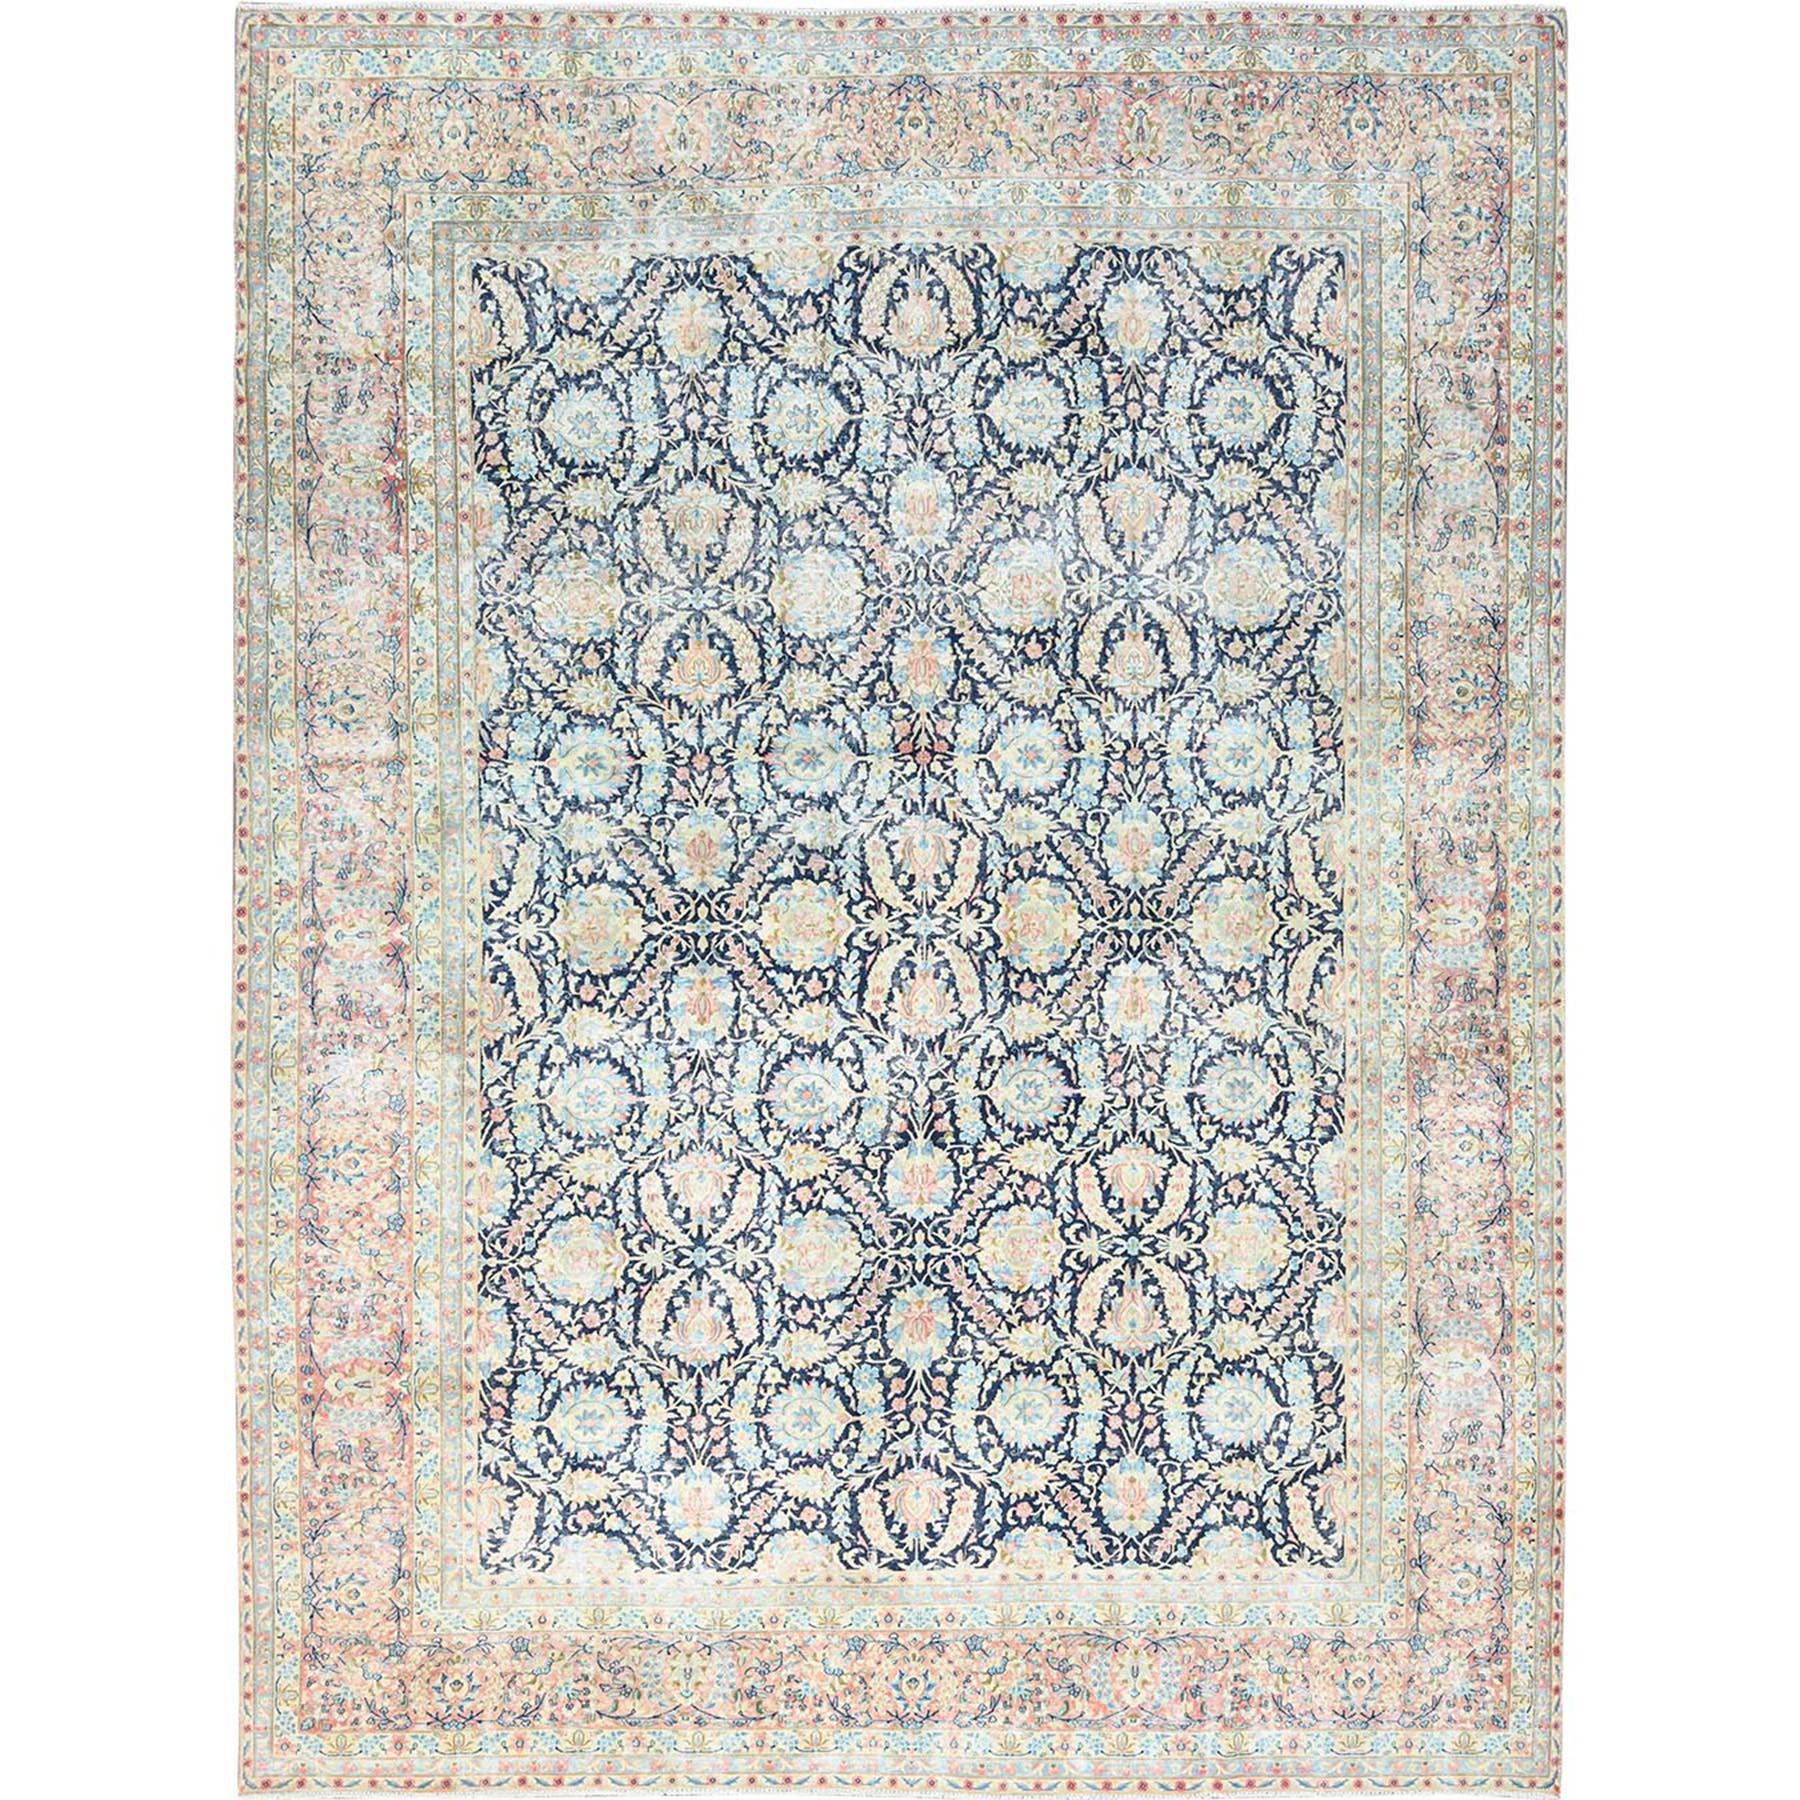  Wool Hand-Knotted Area Rug 11'7